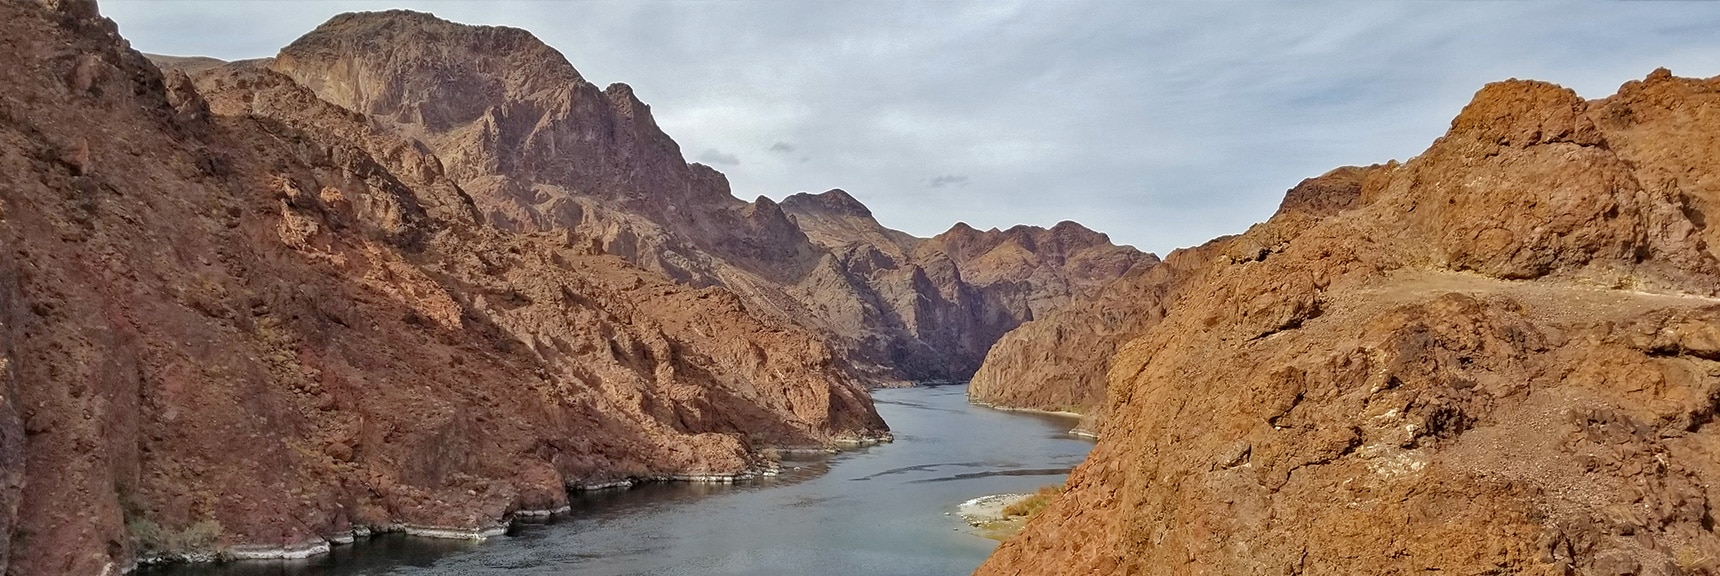 Colorado River Upstream View. Trail Skirted Cliffs on Right. | Arizona Hot Spring | Liberty Bell Arch | Lake Mead National Recreation Area, Arizona